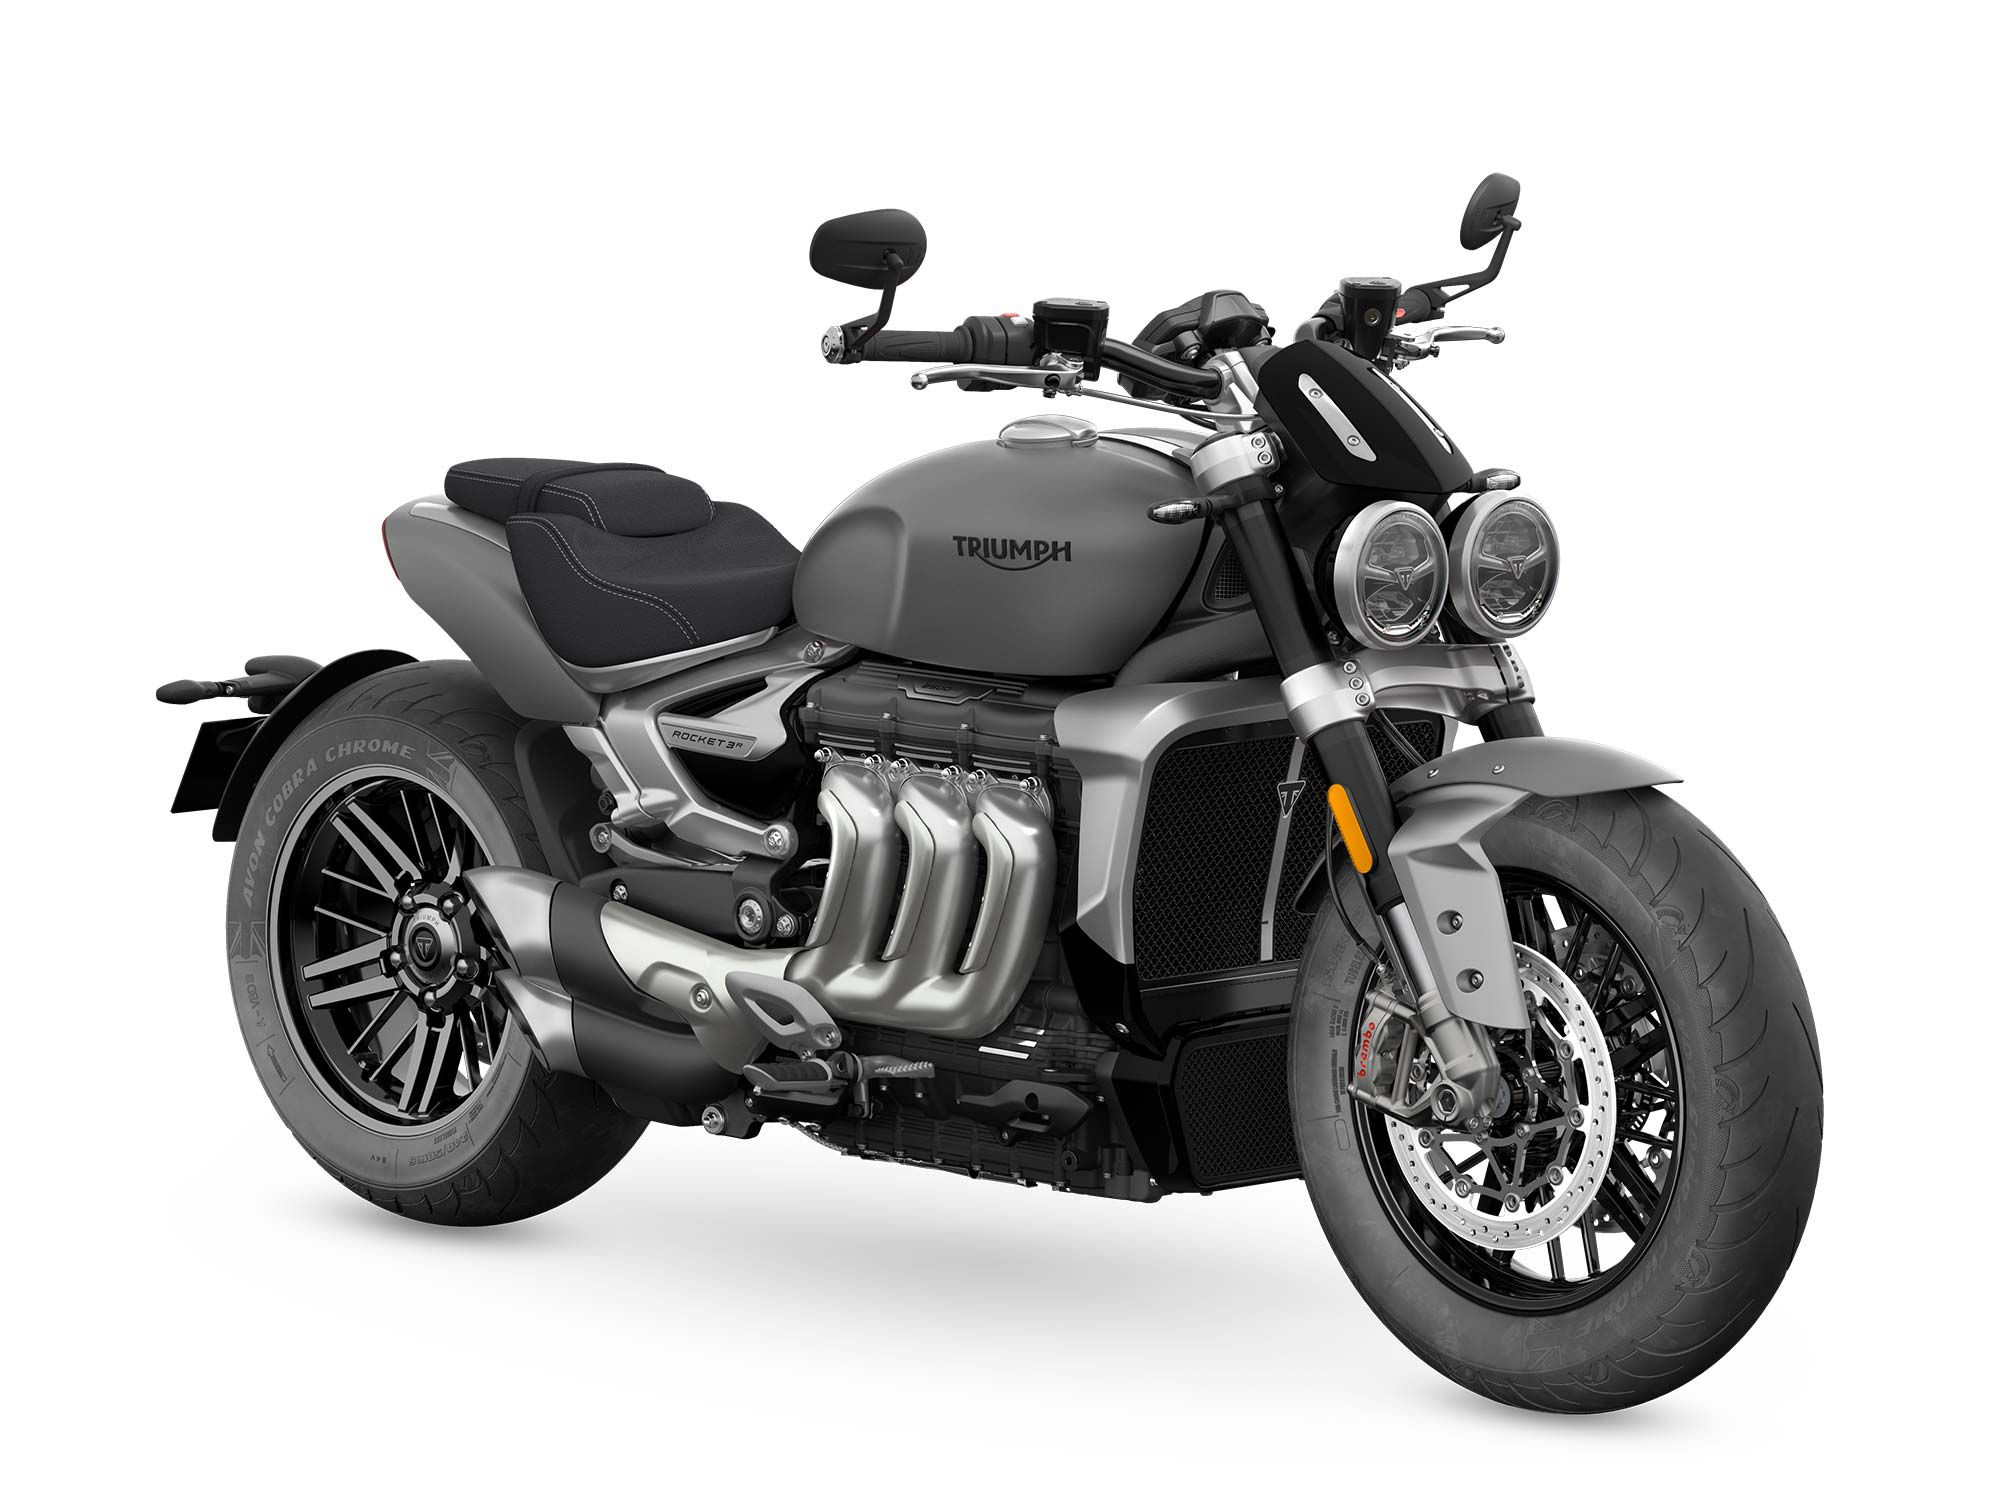 Excellent fit and finish, impressive performance and handling, and an imposing look all come together to make the Triumph Rocket 3 an impressive motorcycle.